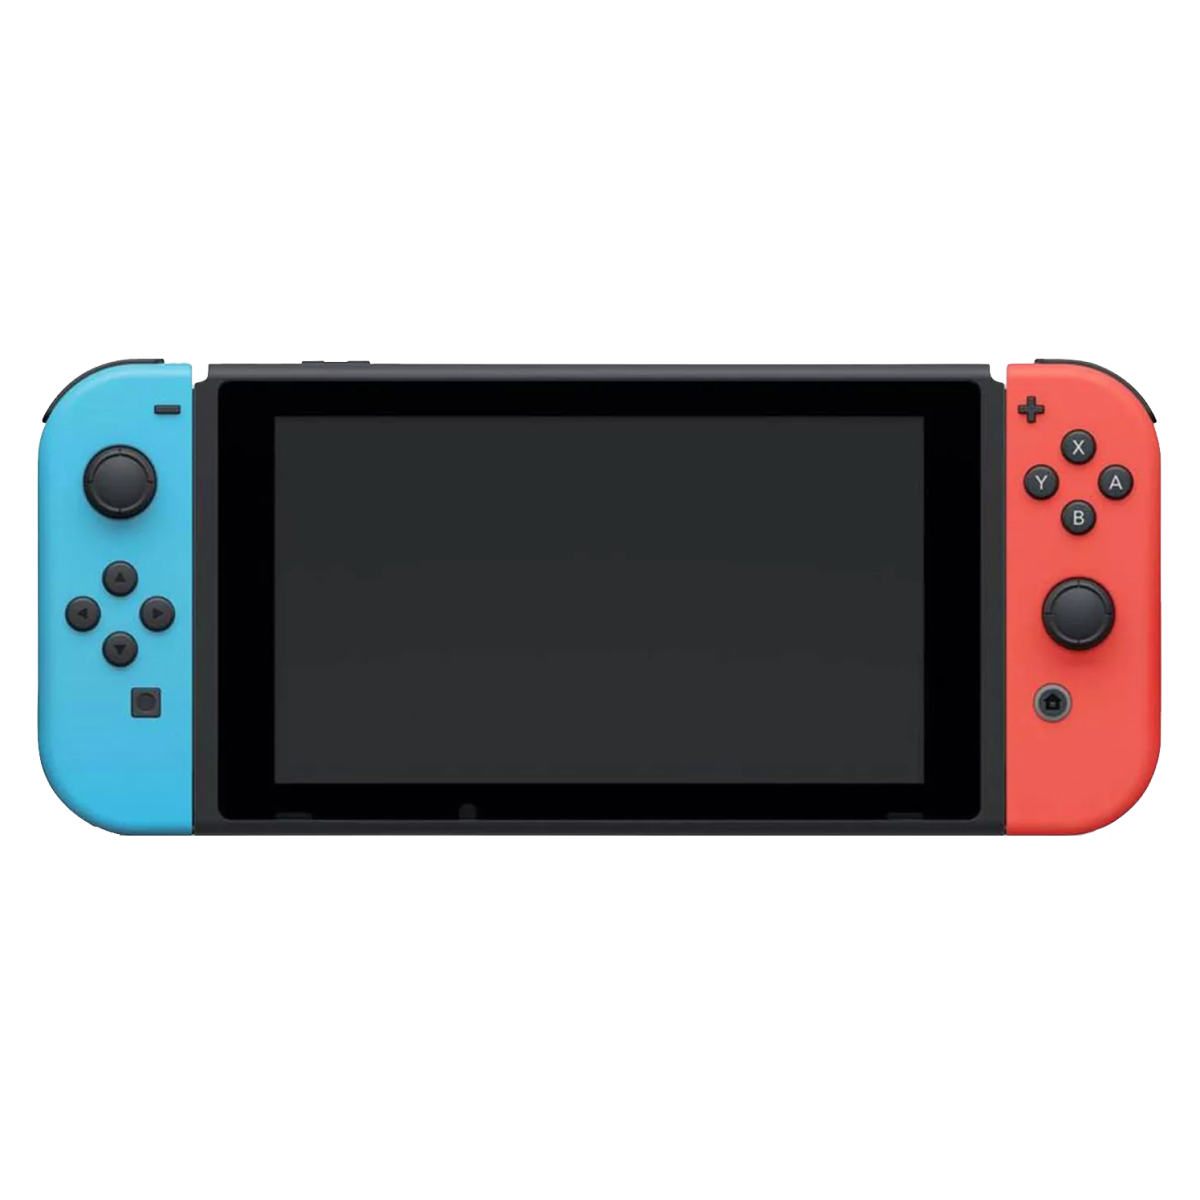 A red and blue Nintendo Switch OLED gaming console